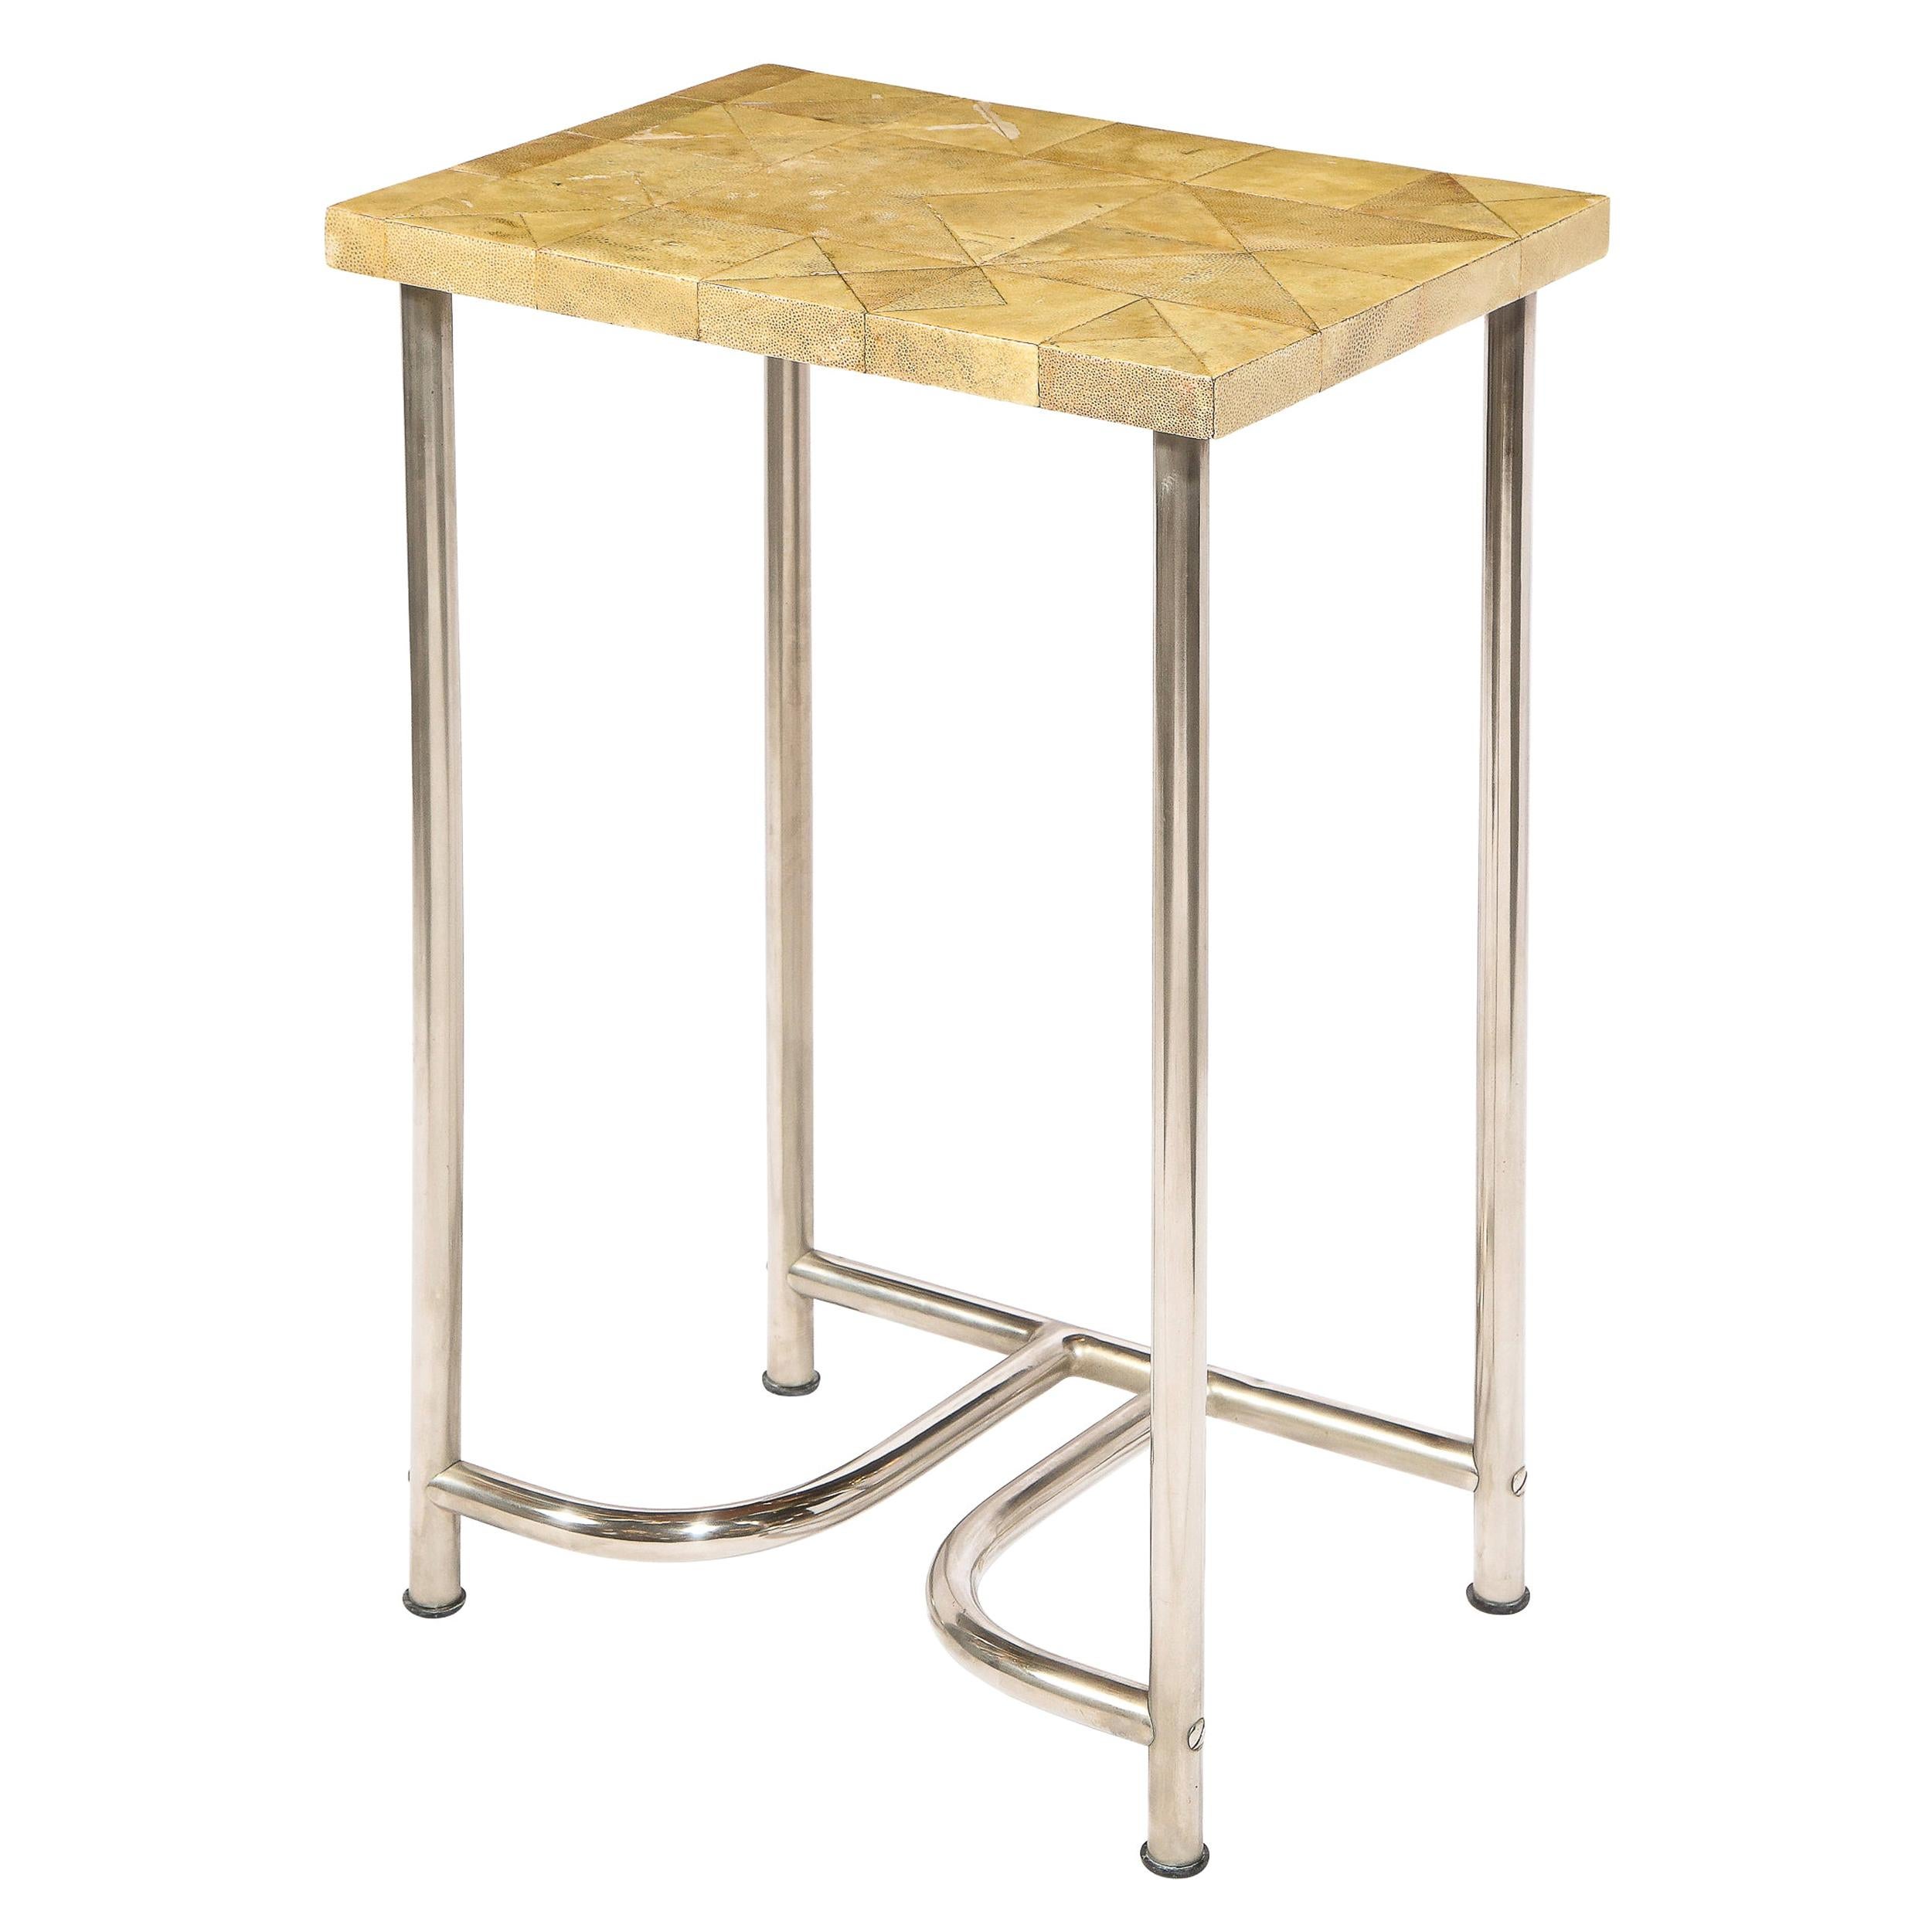 Art Deco Side Table with Mosaic Shagreen Top & Sculptural Aluminum Base